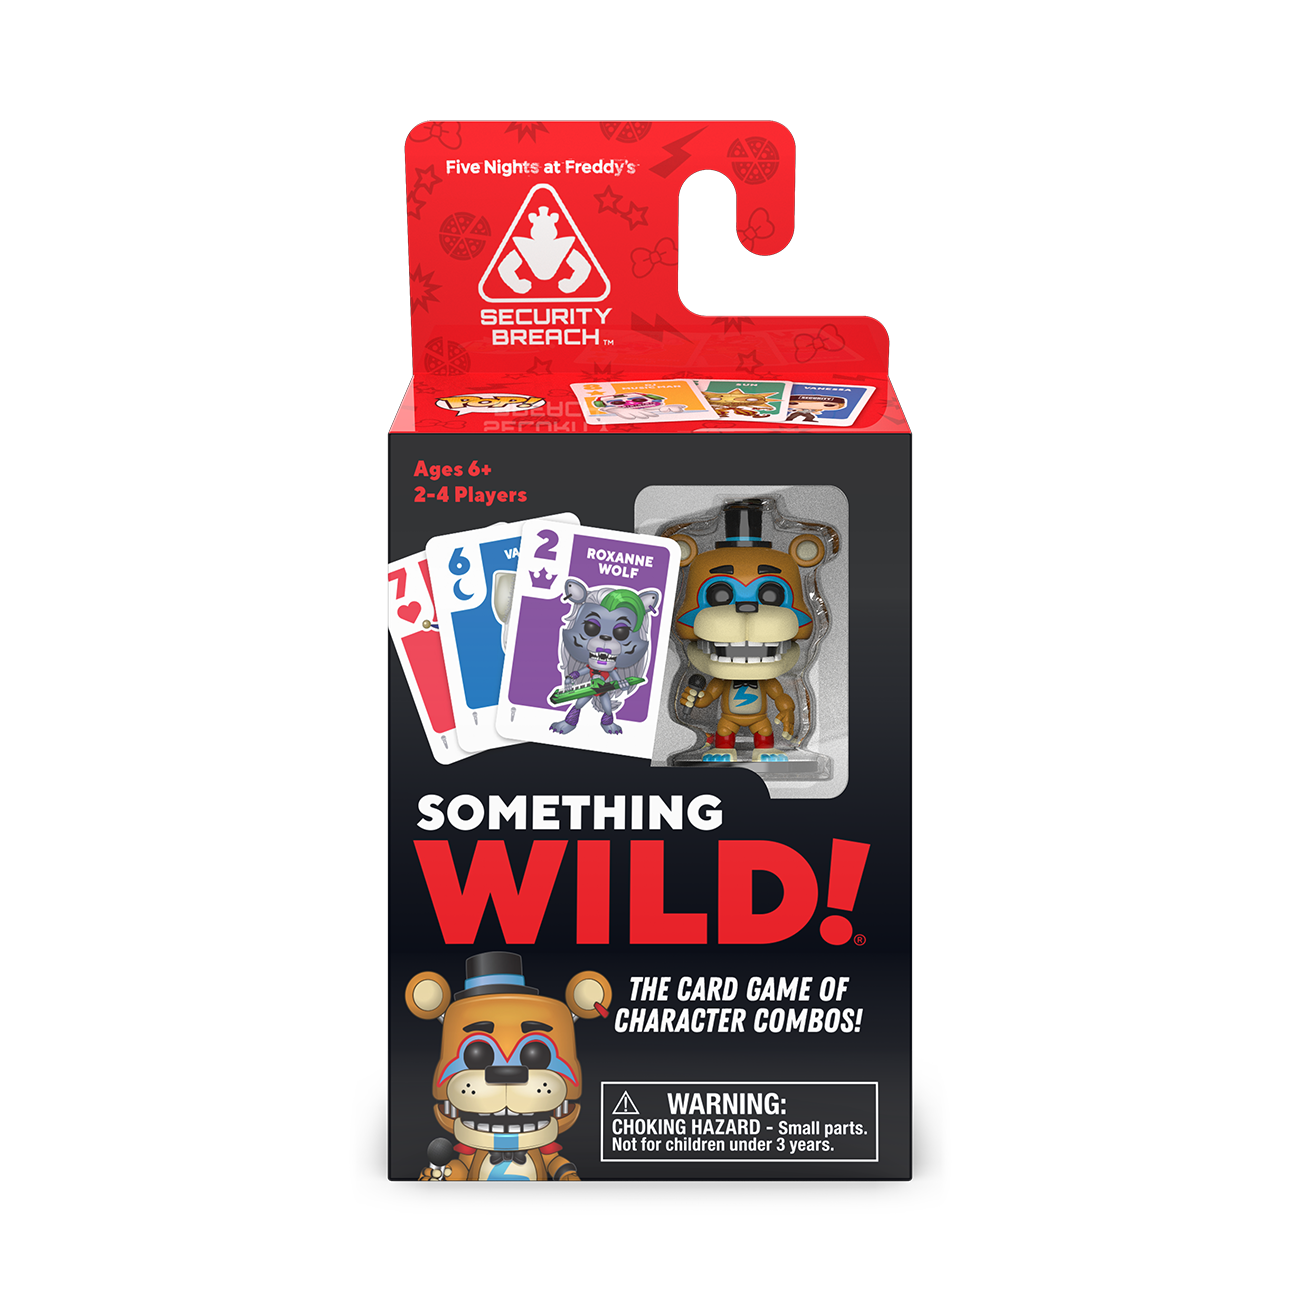 FNAF Plushies Set,FNAF Plushies,FNAF Plush,FNAF Security Breach Plushies  Set for Game Fans (Modern)